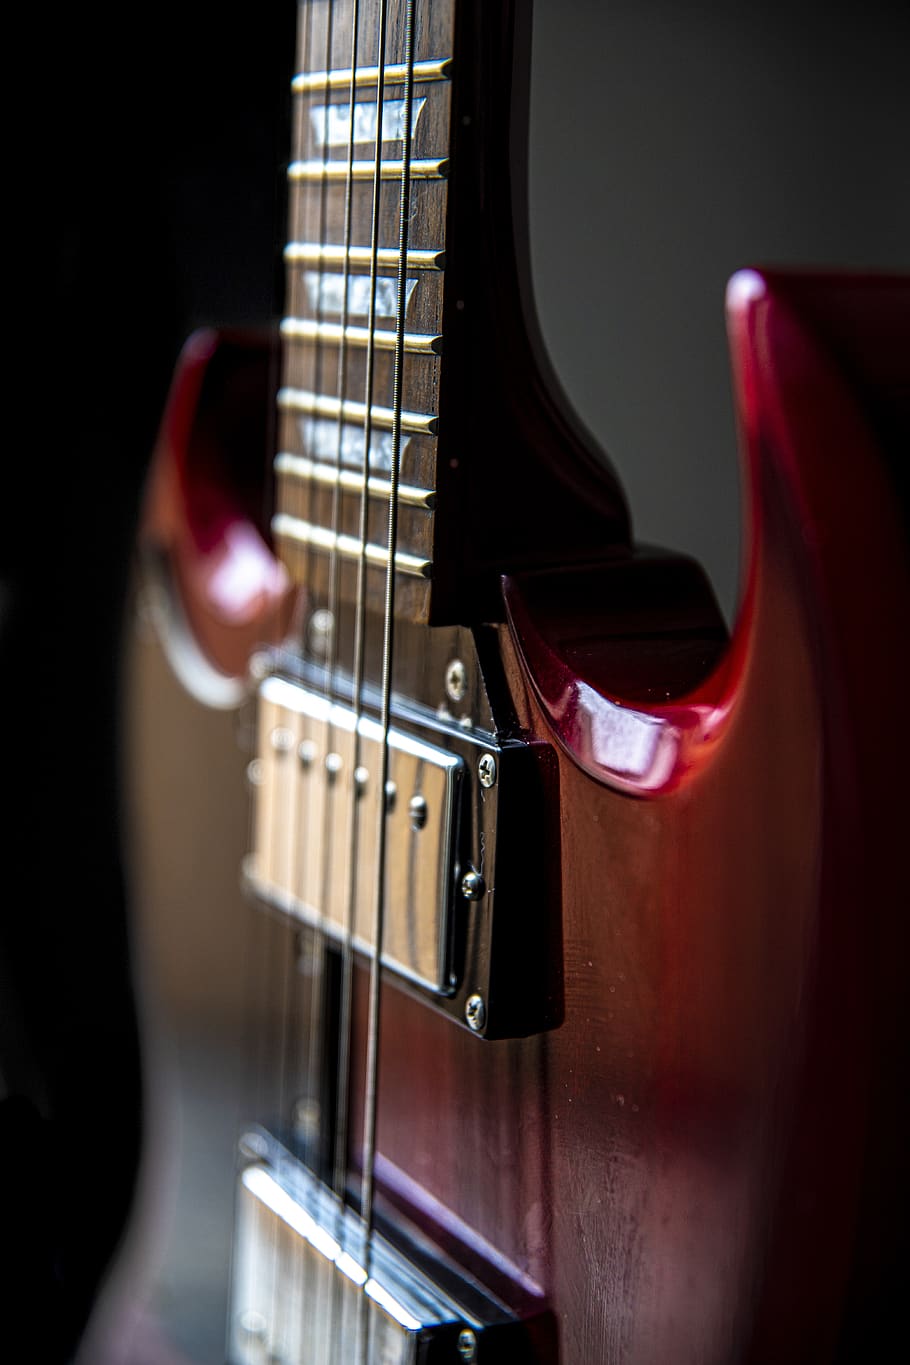 close up, guitar, head, handle, strings, instrument, musician, music, electrically, play